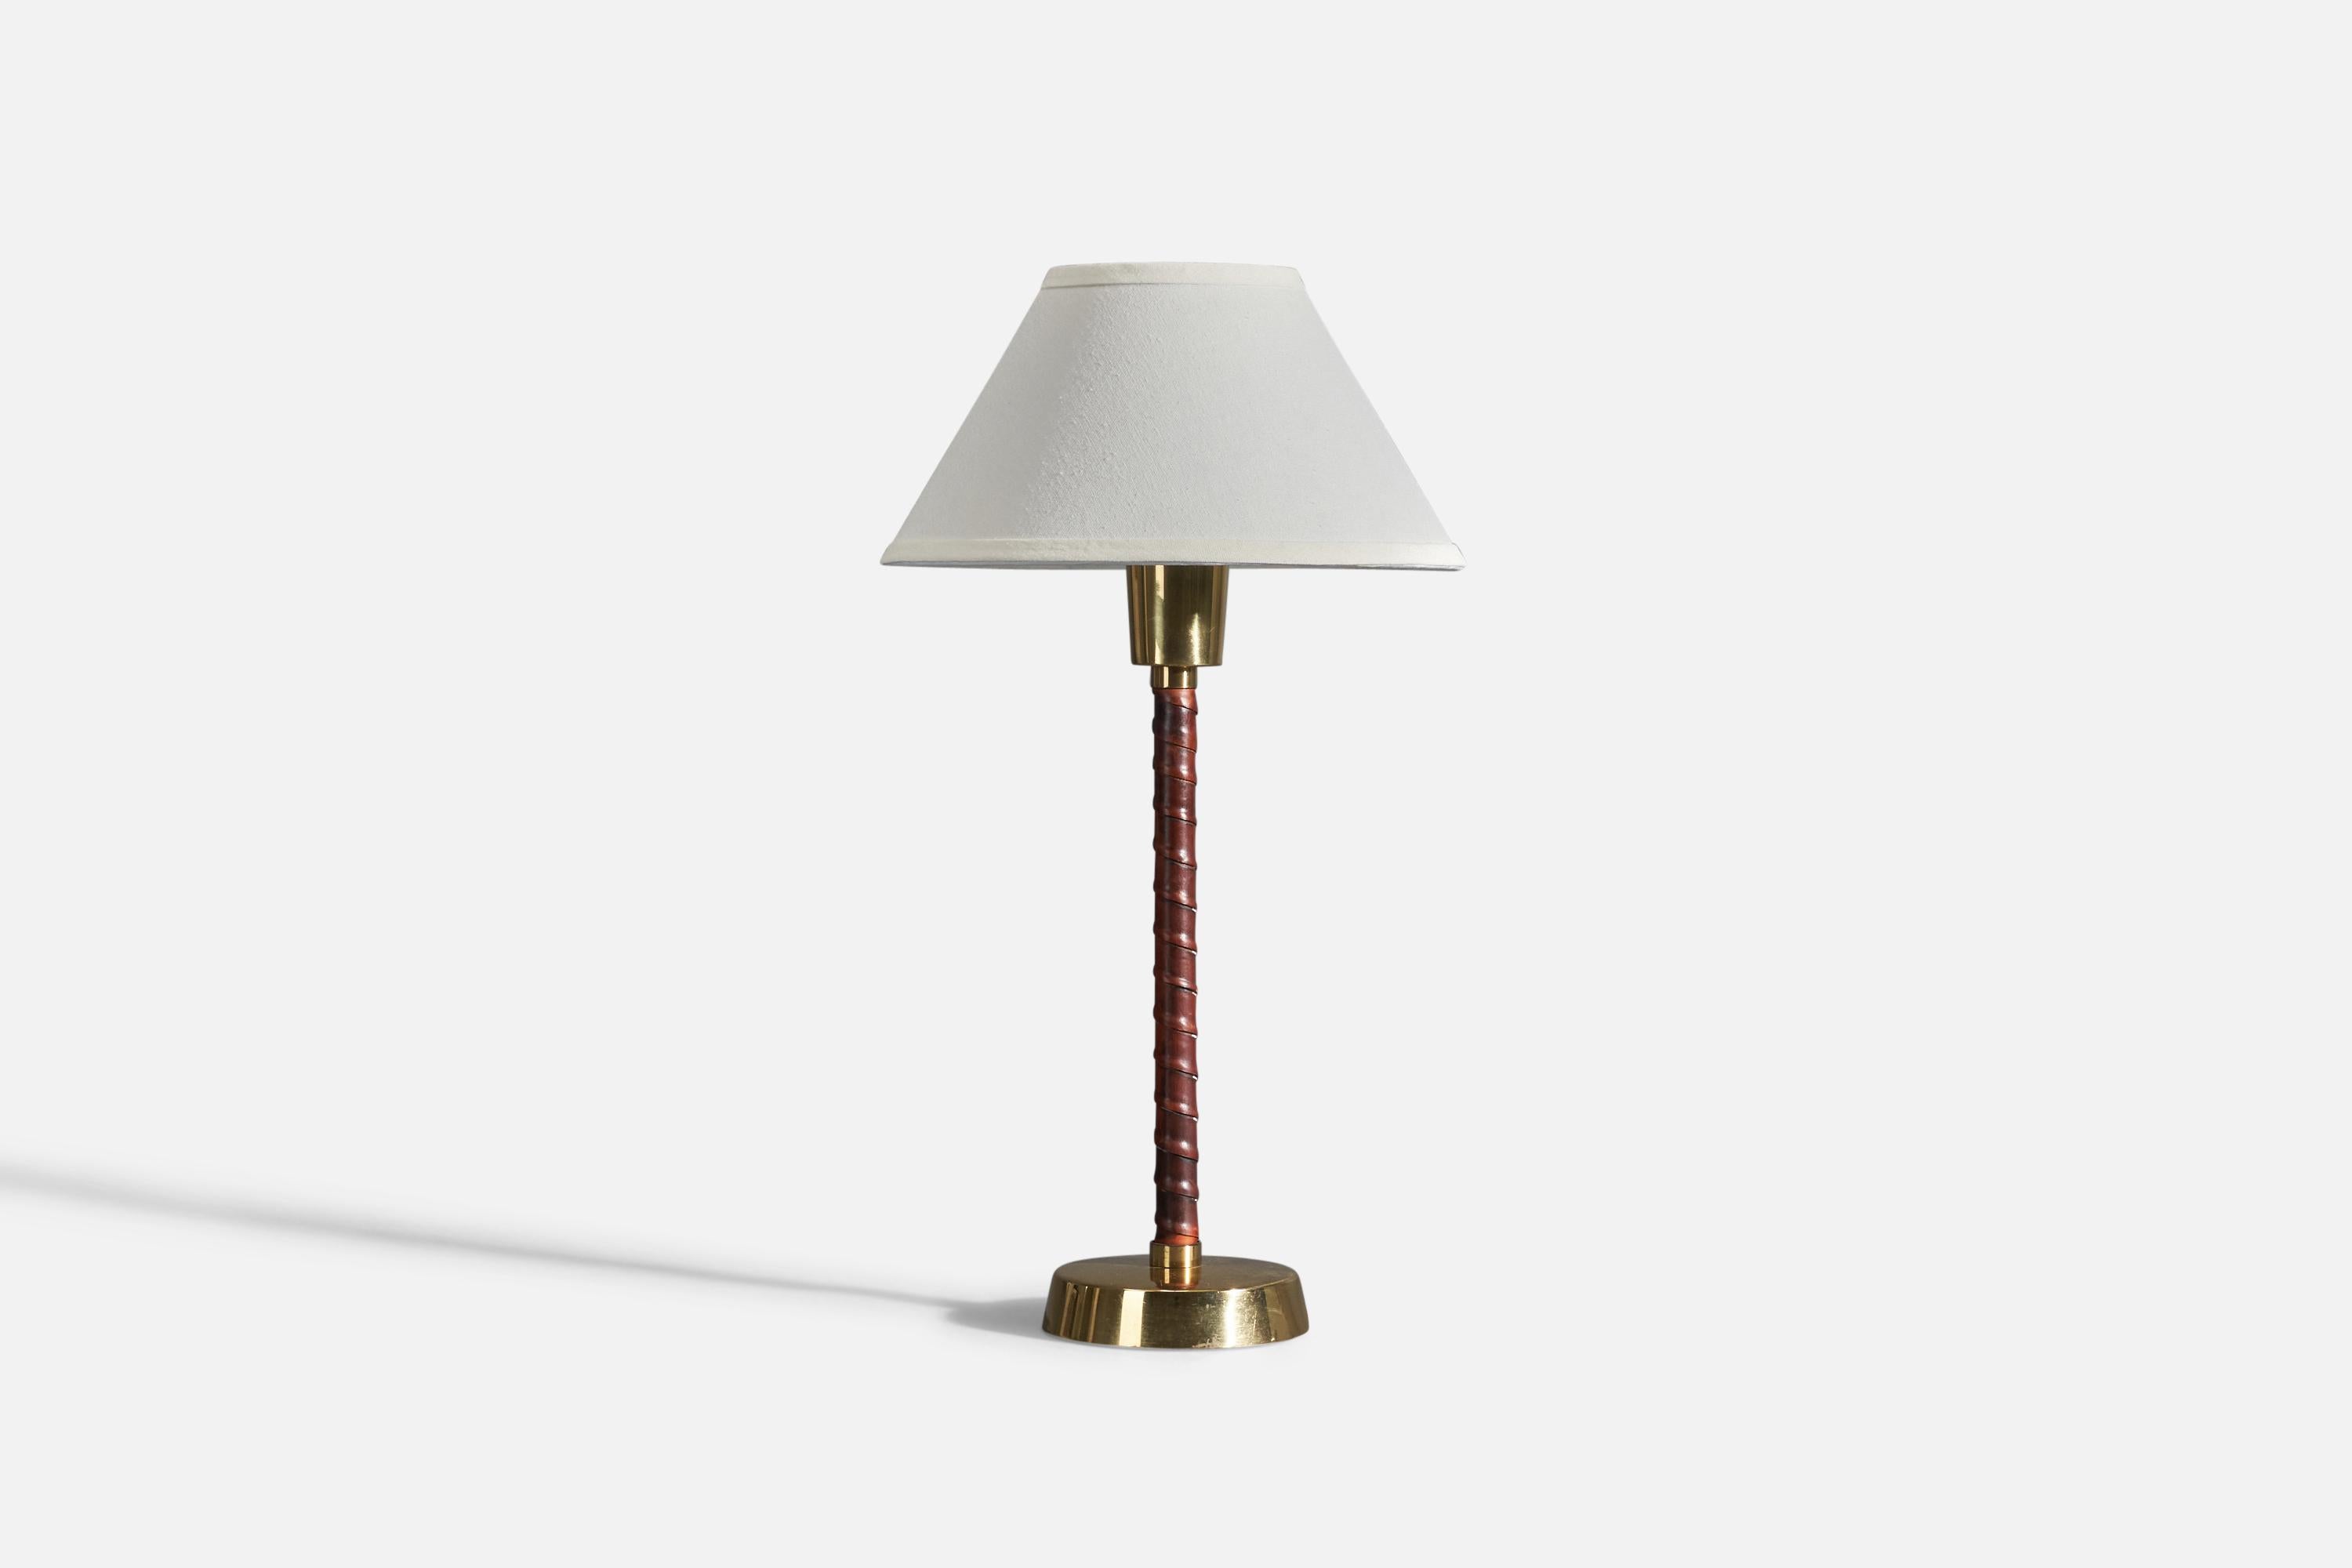 A pair of table lamps designed by Lisa Johansson-Pape and produced by Oy Stockmann-Ornö AB, Kerava, Finland,  1950.

Sockets take standard E-26 medium base bulbs.

There is no maximum wattage stated on the fixtures.